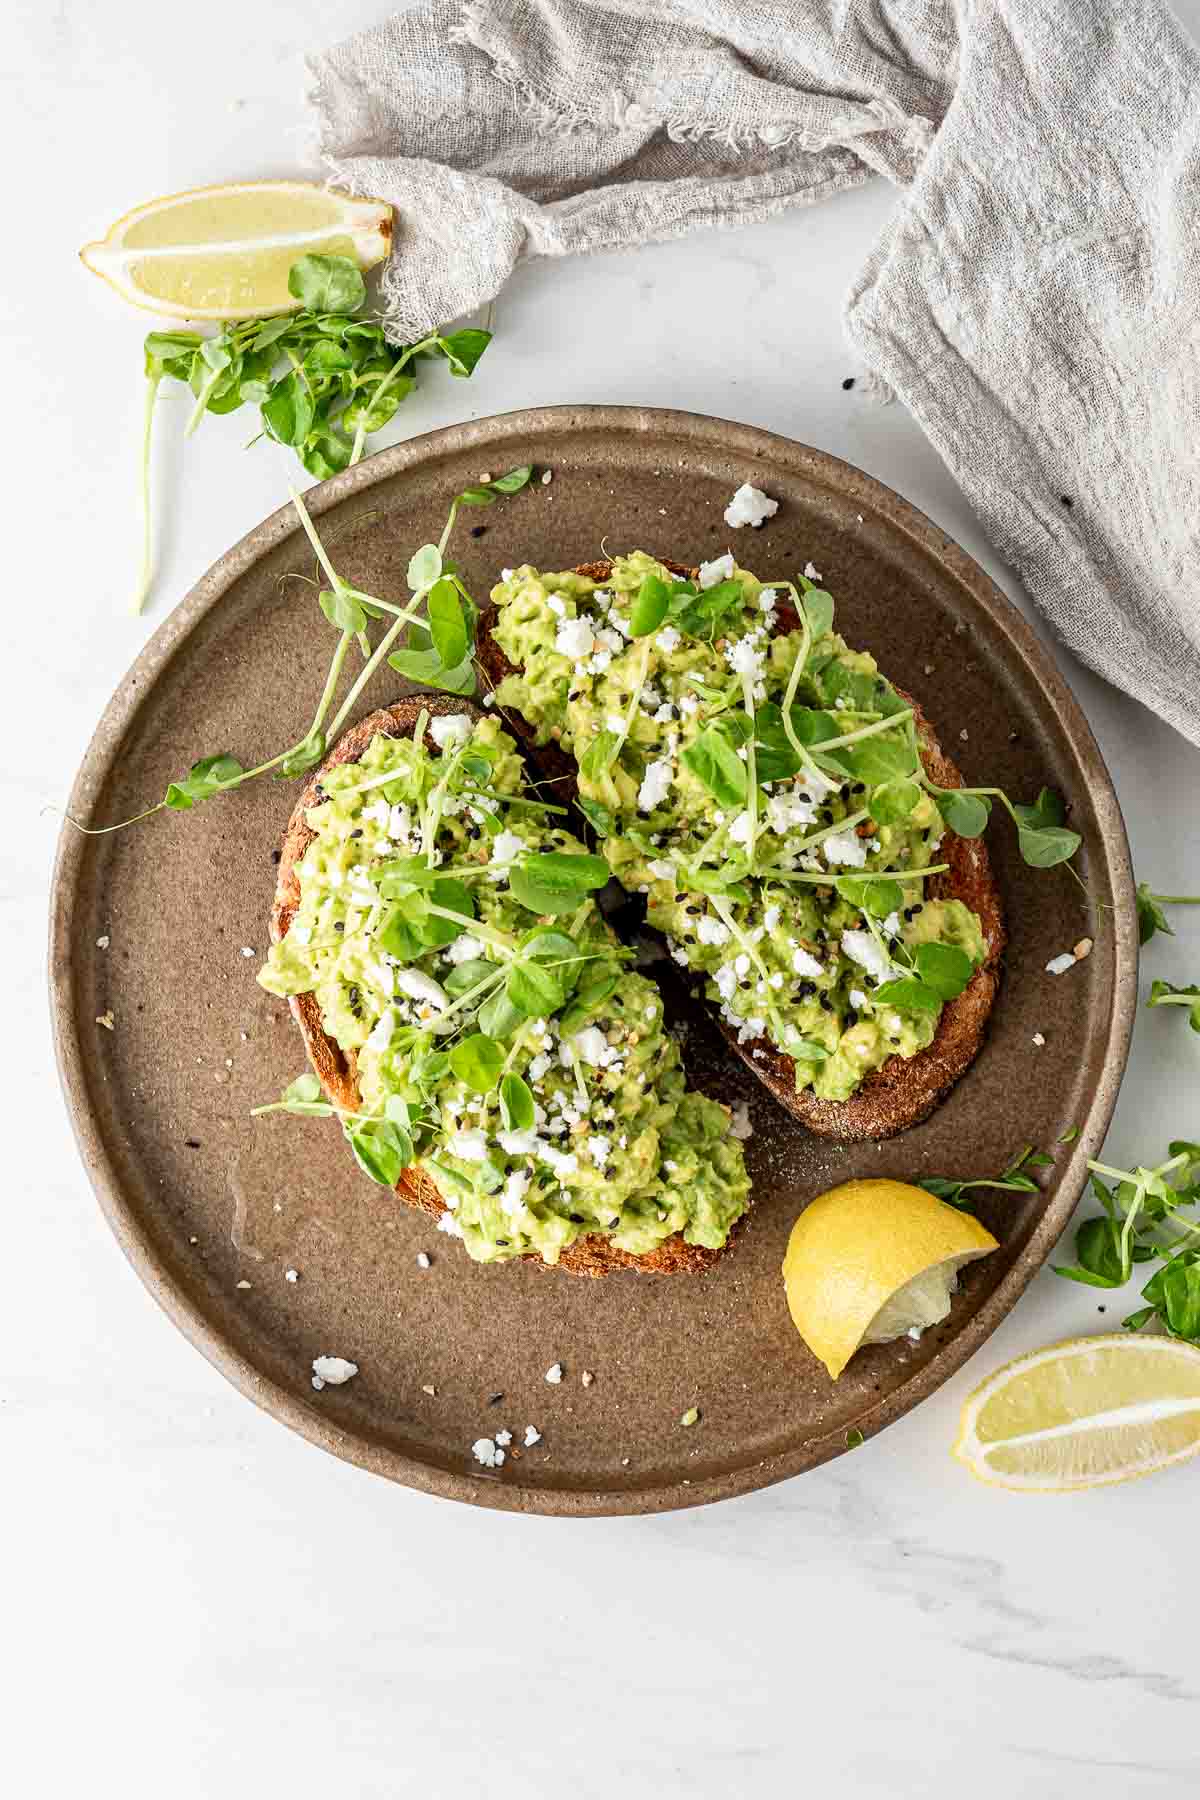 A plate of avocado toast with lemon and sprouts.